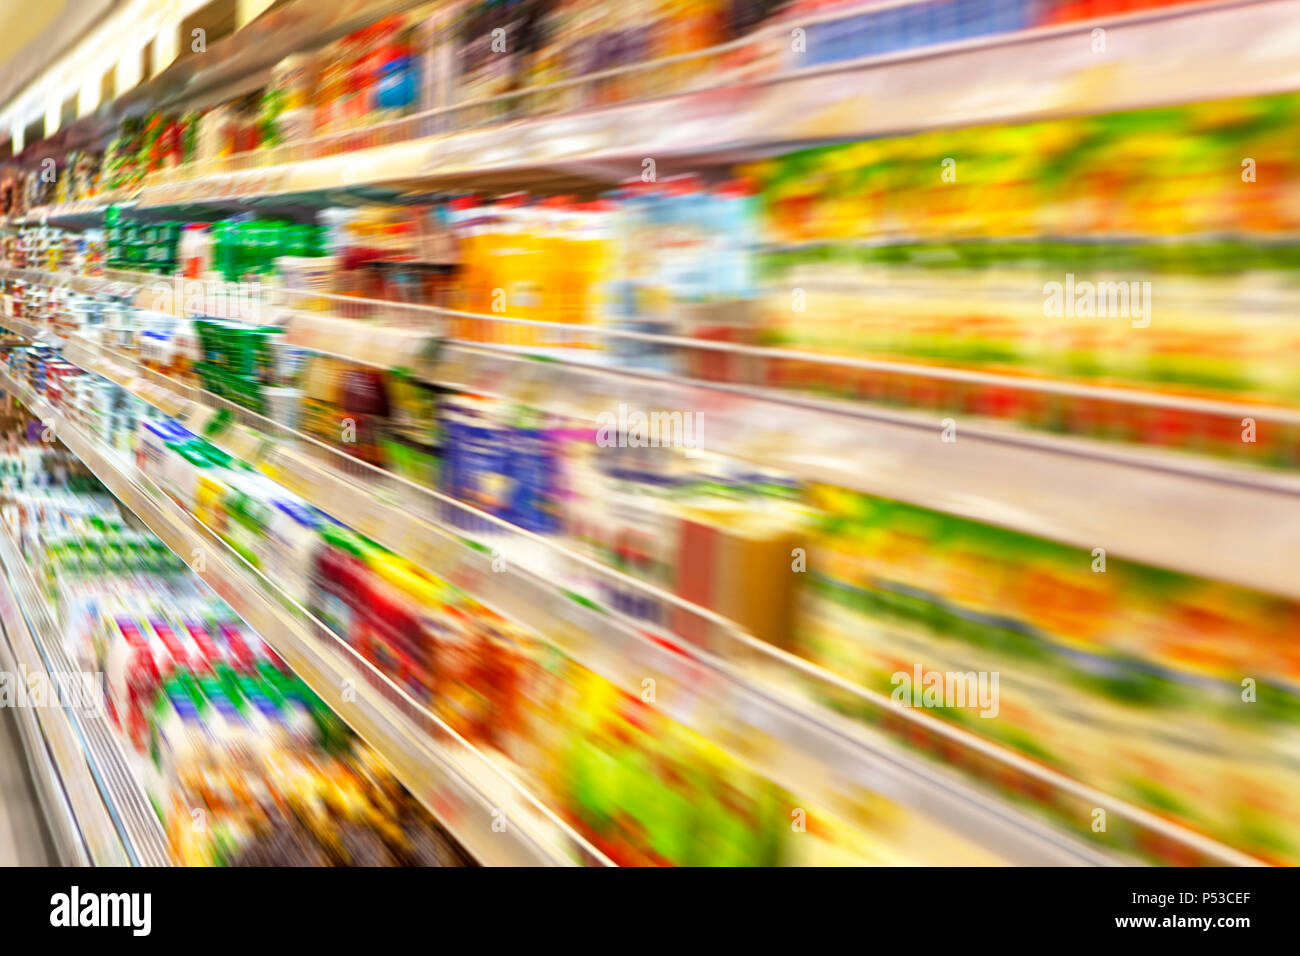 Blurred photos showcases shops. Long rows of racks with goods. Stock Photo